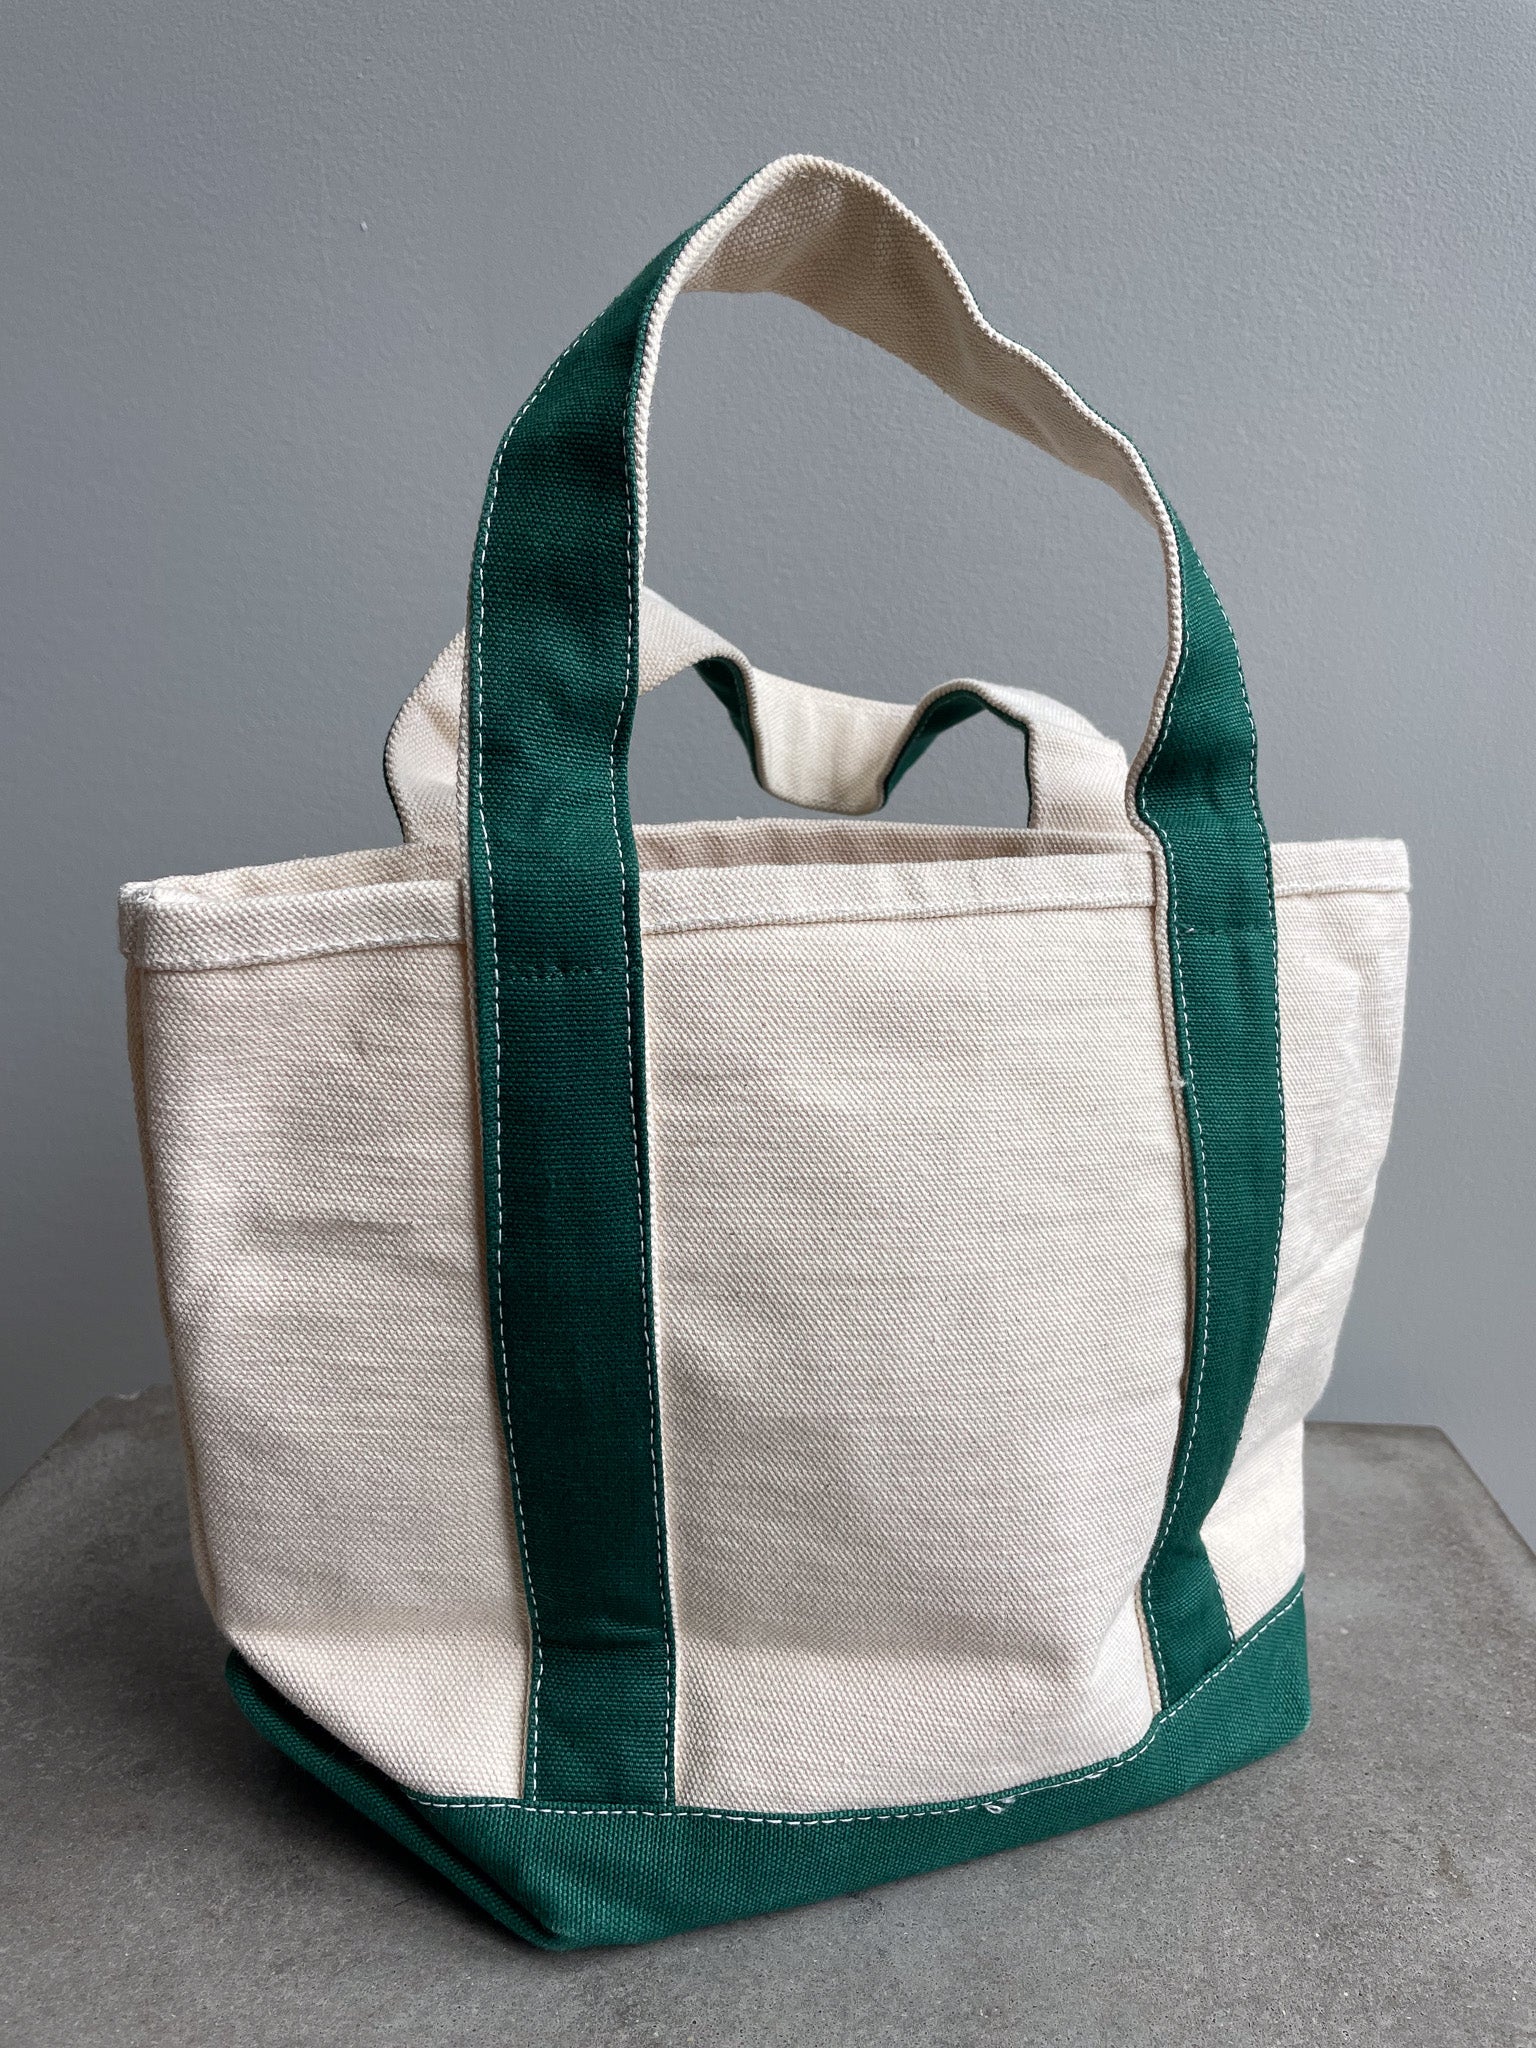 Small LL Bean Long Handle Canvas Boat & Tote Bag / Made in USA 